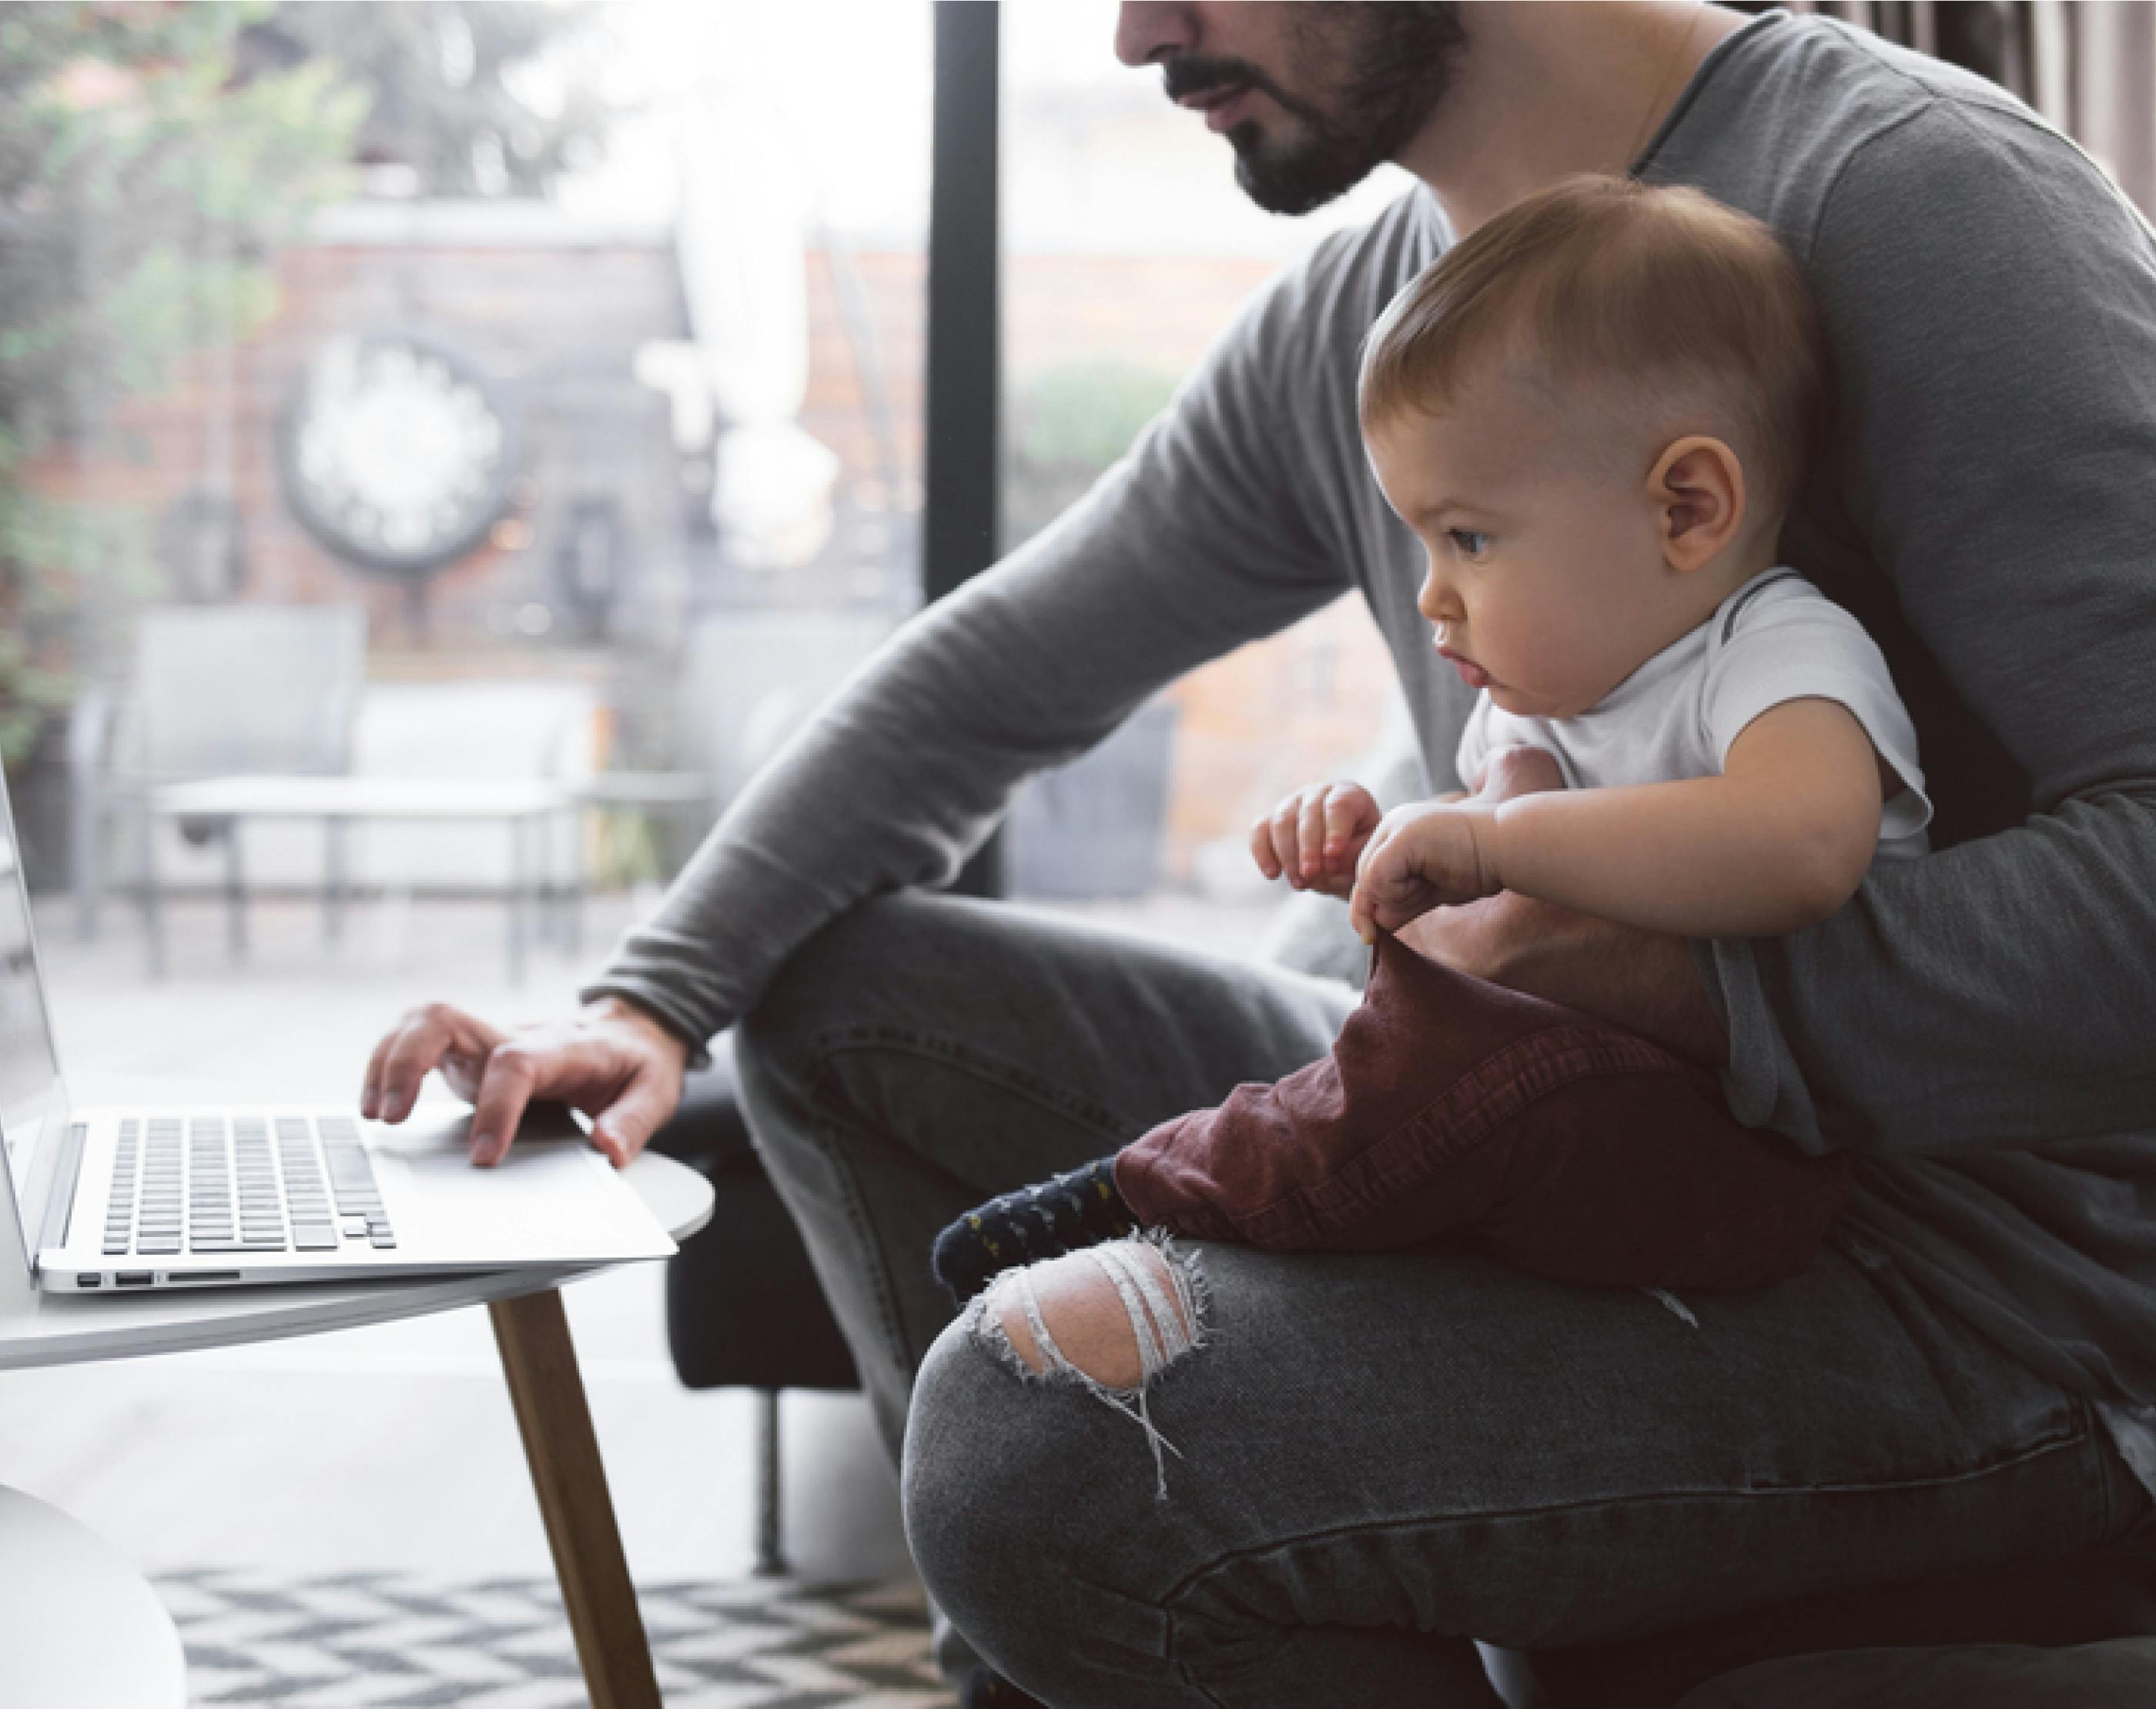 Adult and child using laptop